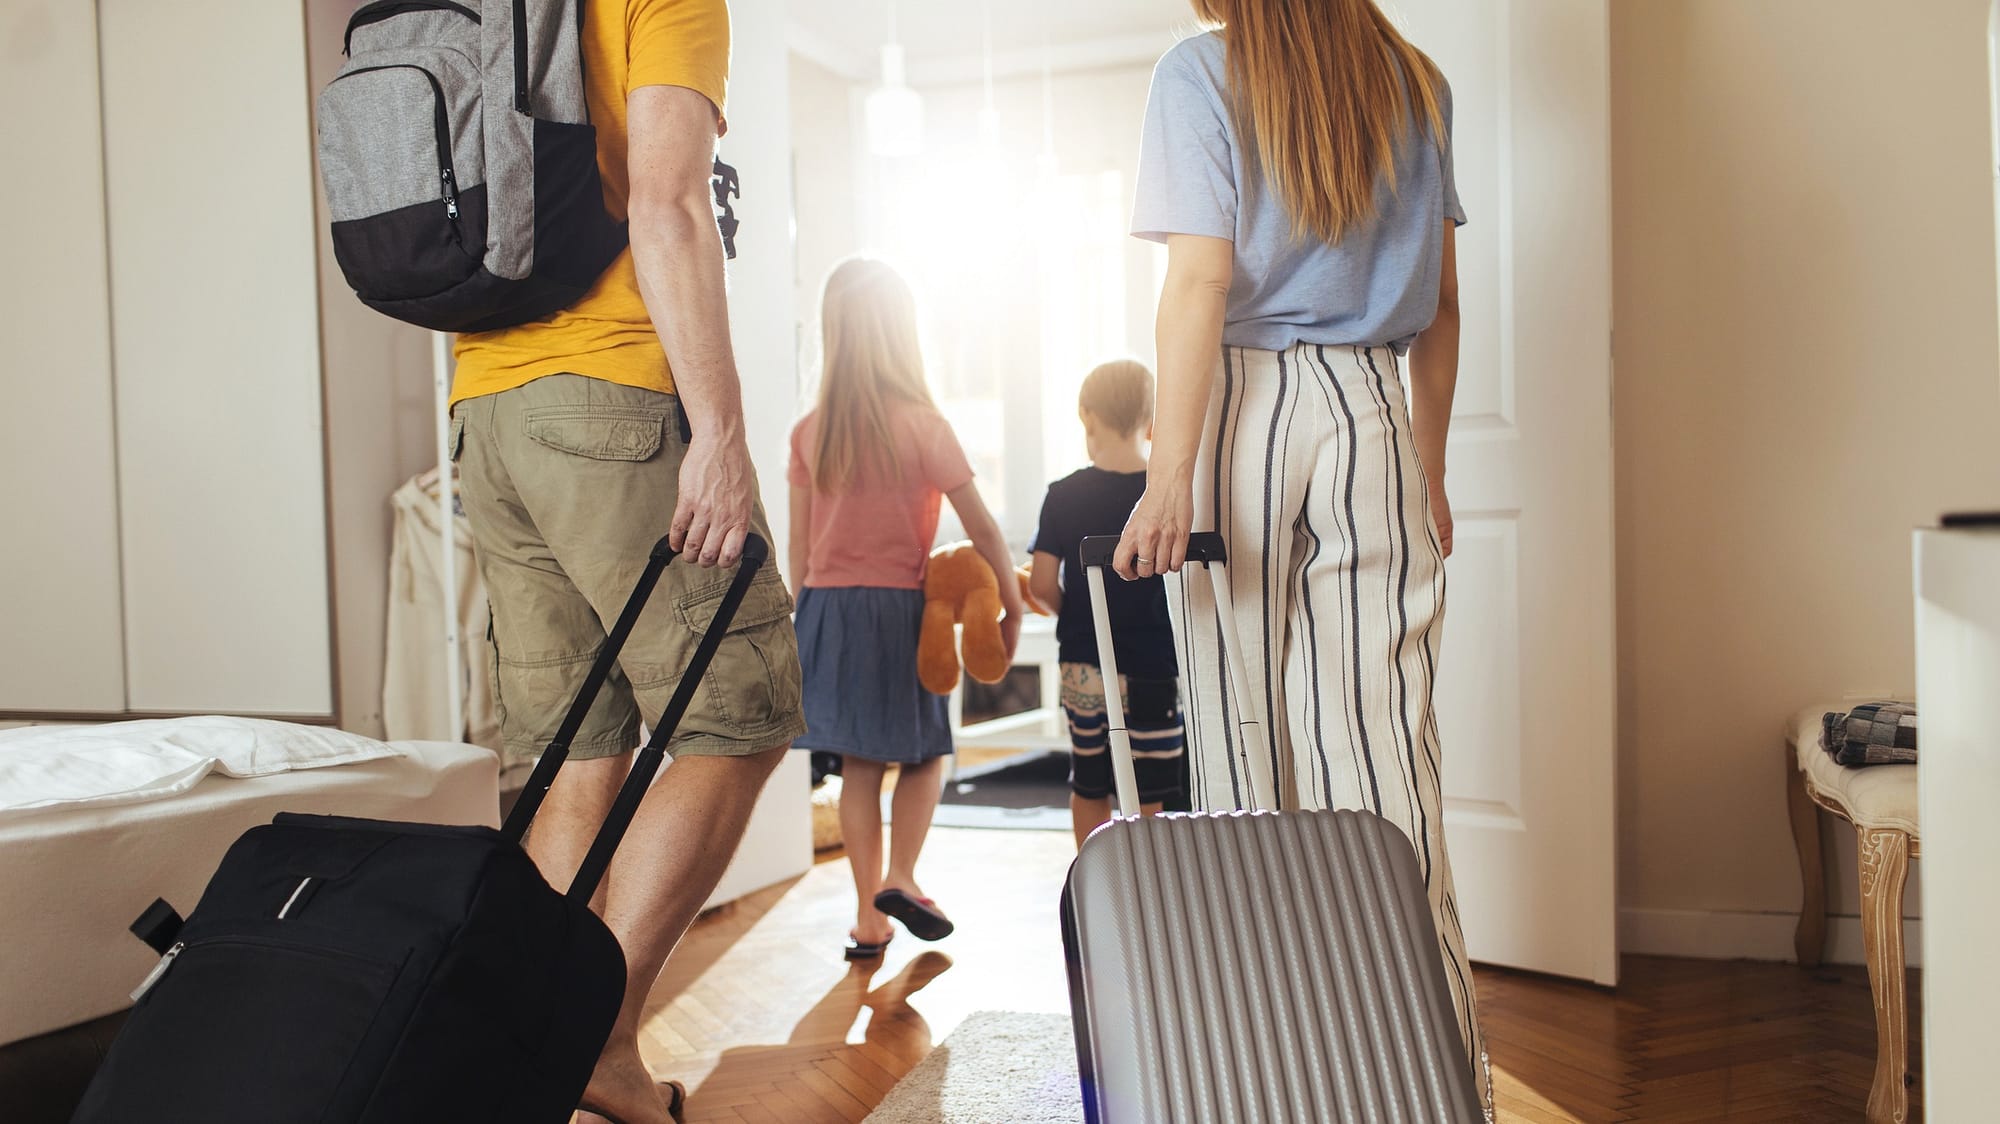 family with suitcases